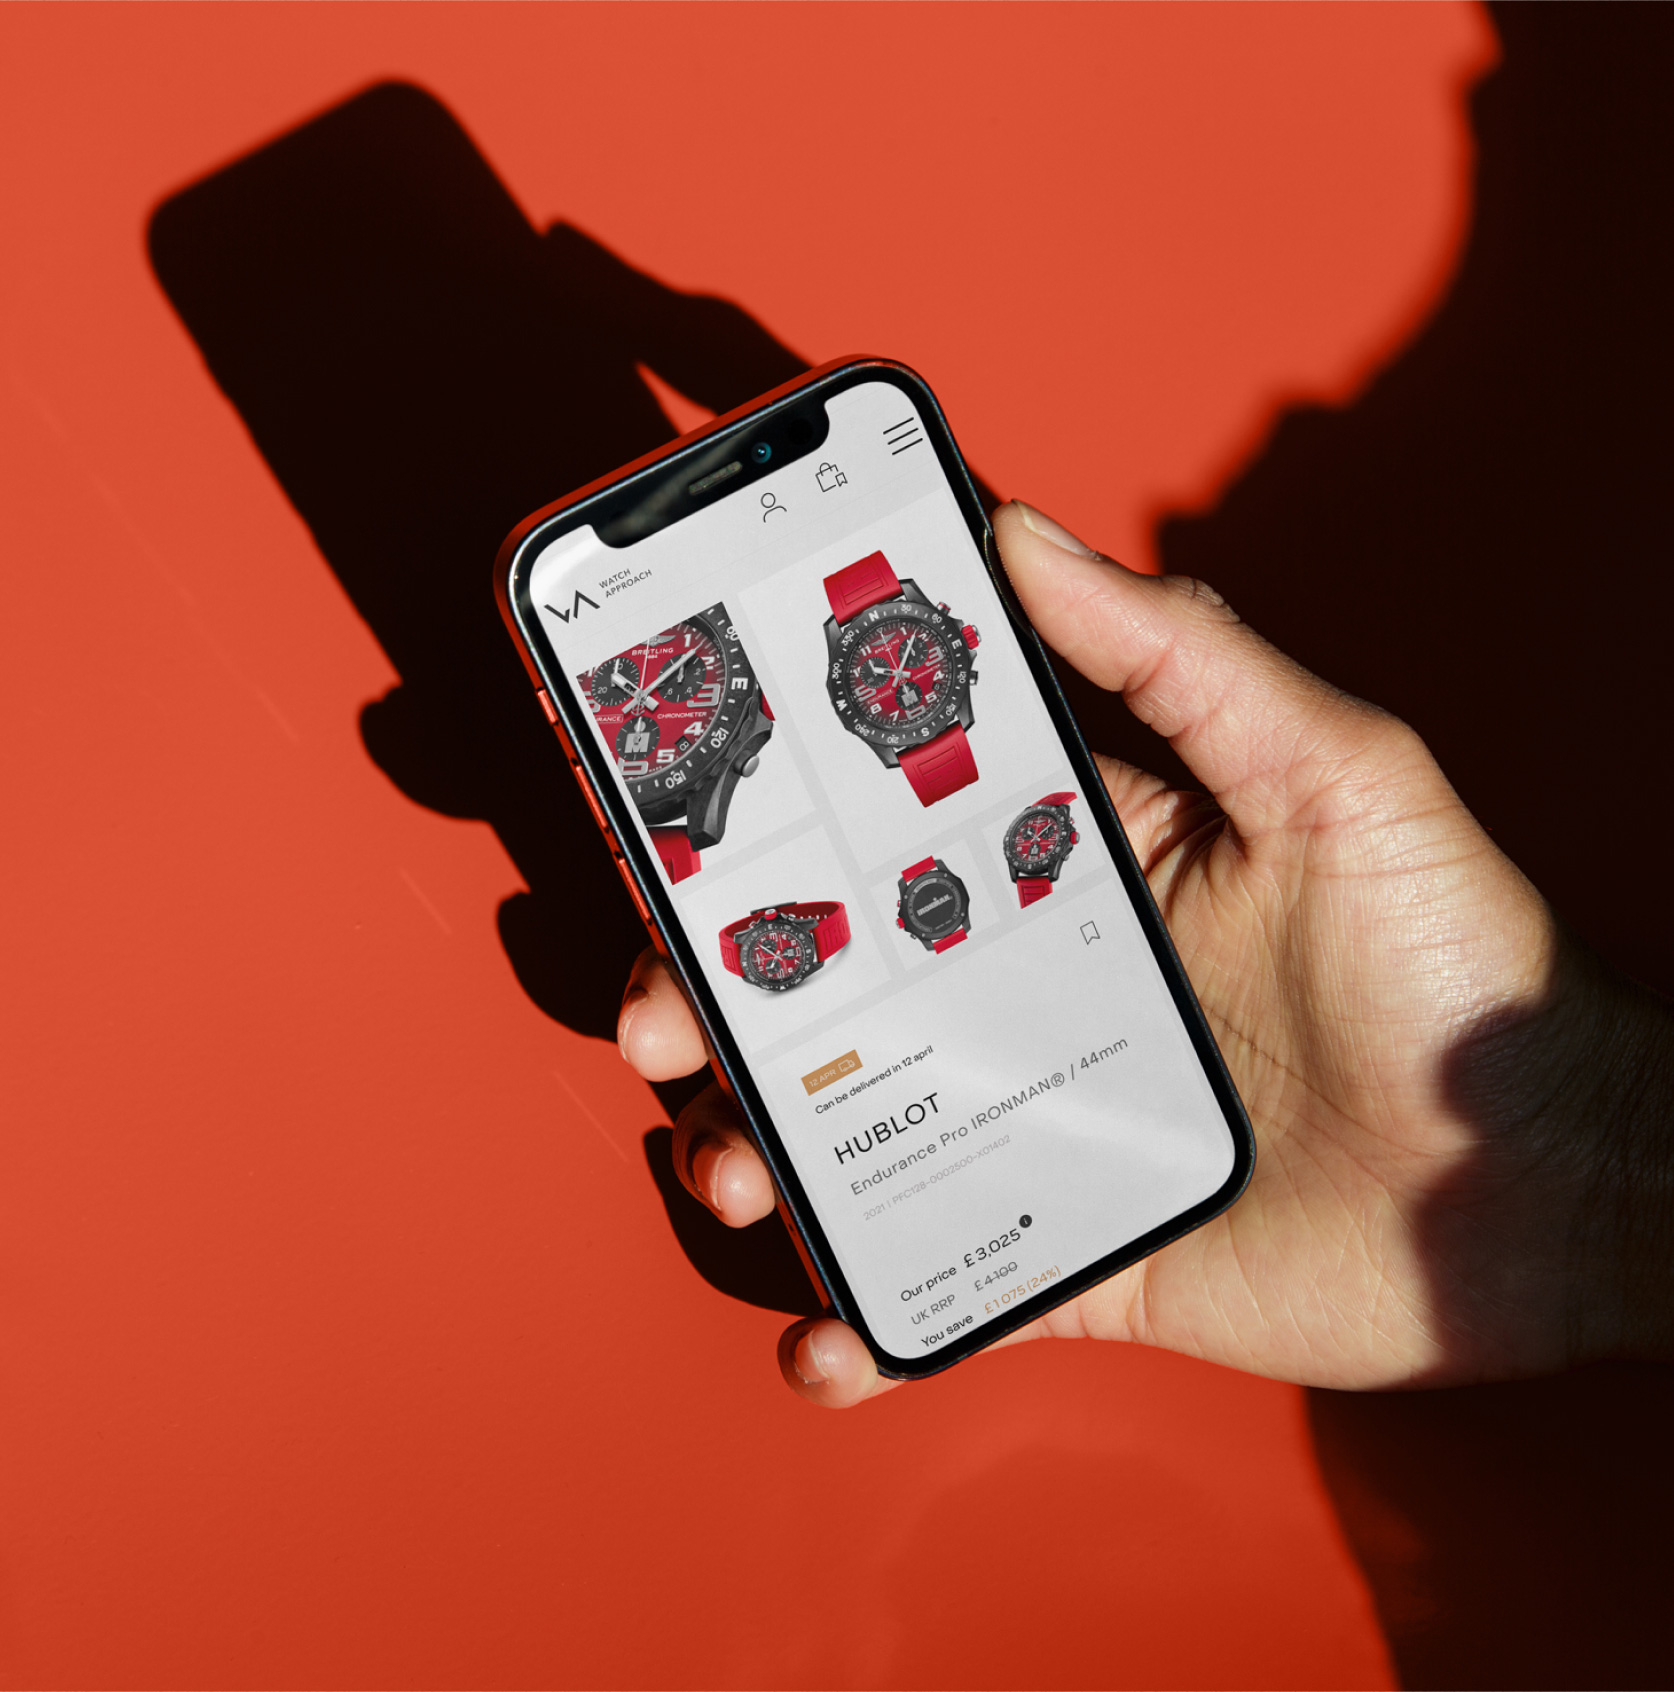 Mobile phone on a red background displaying the Watch approach website new design.